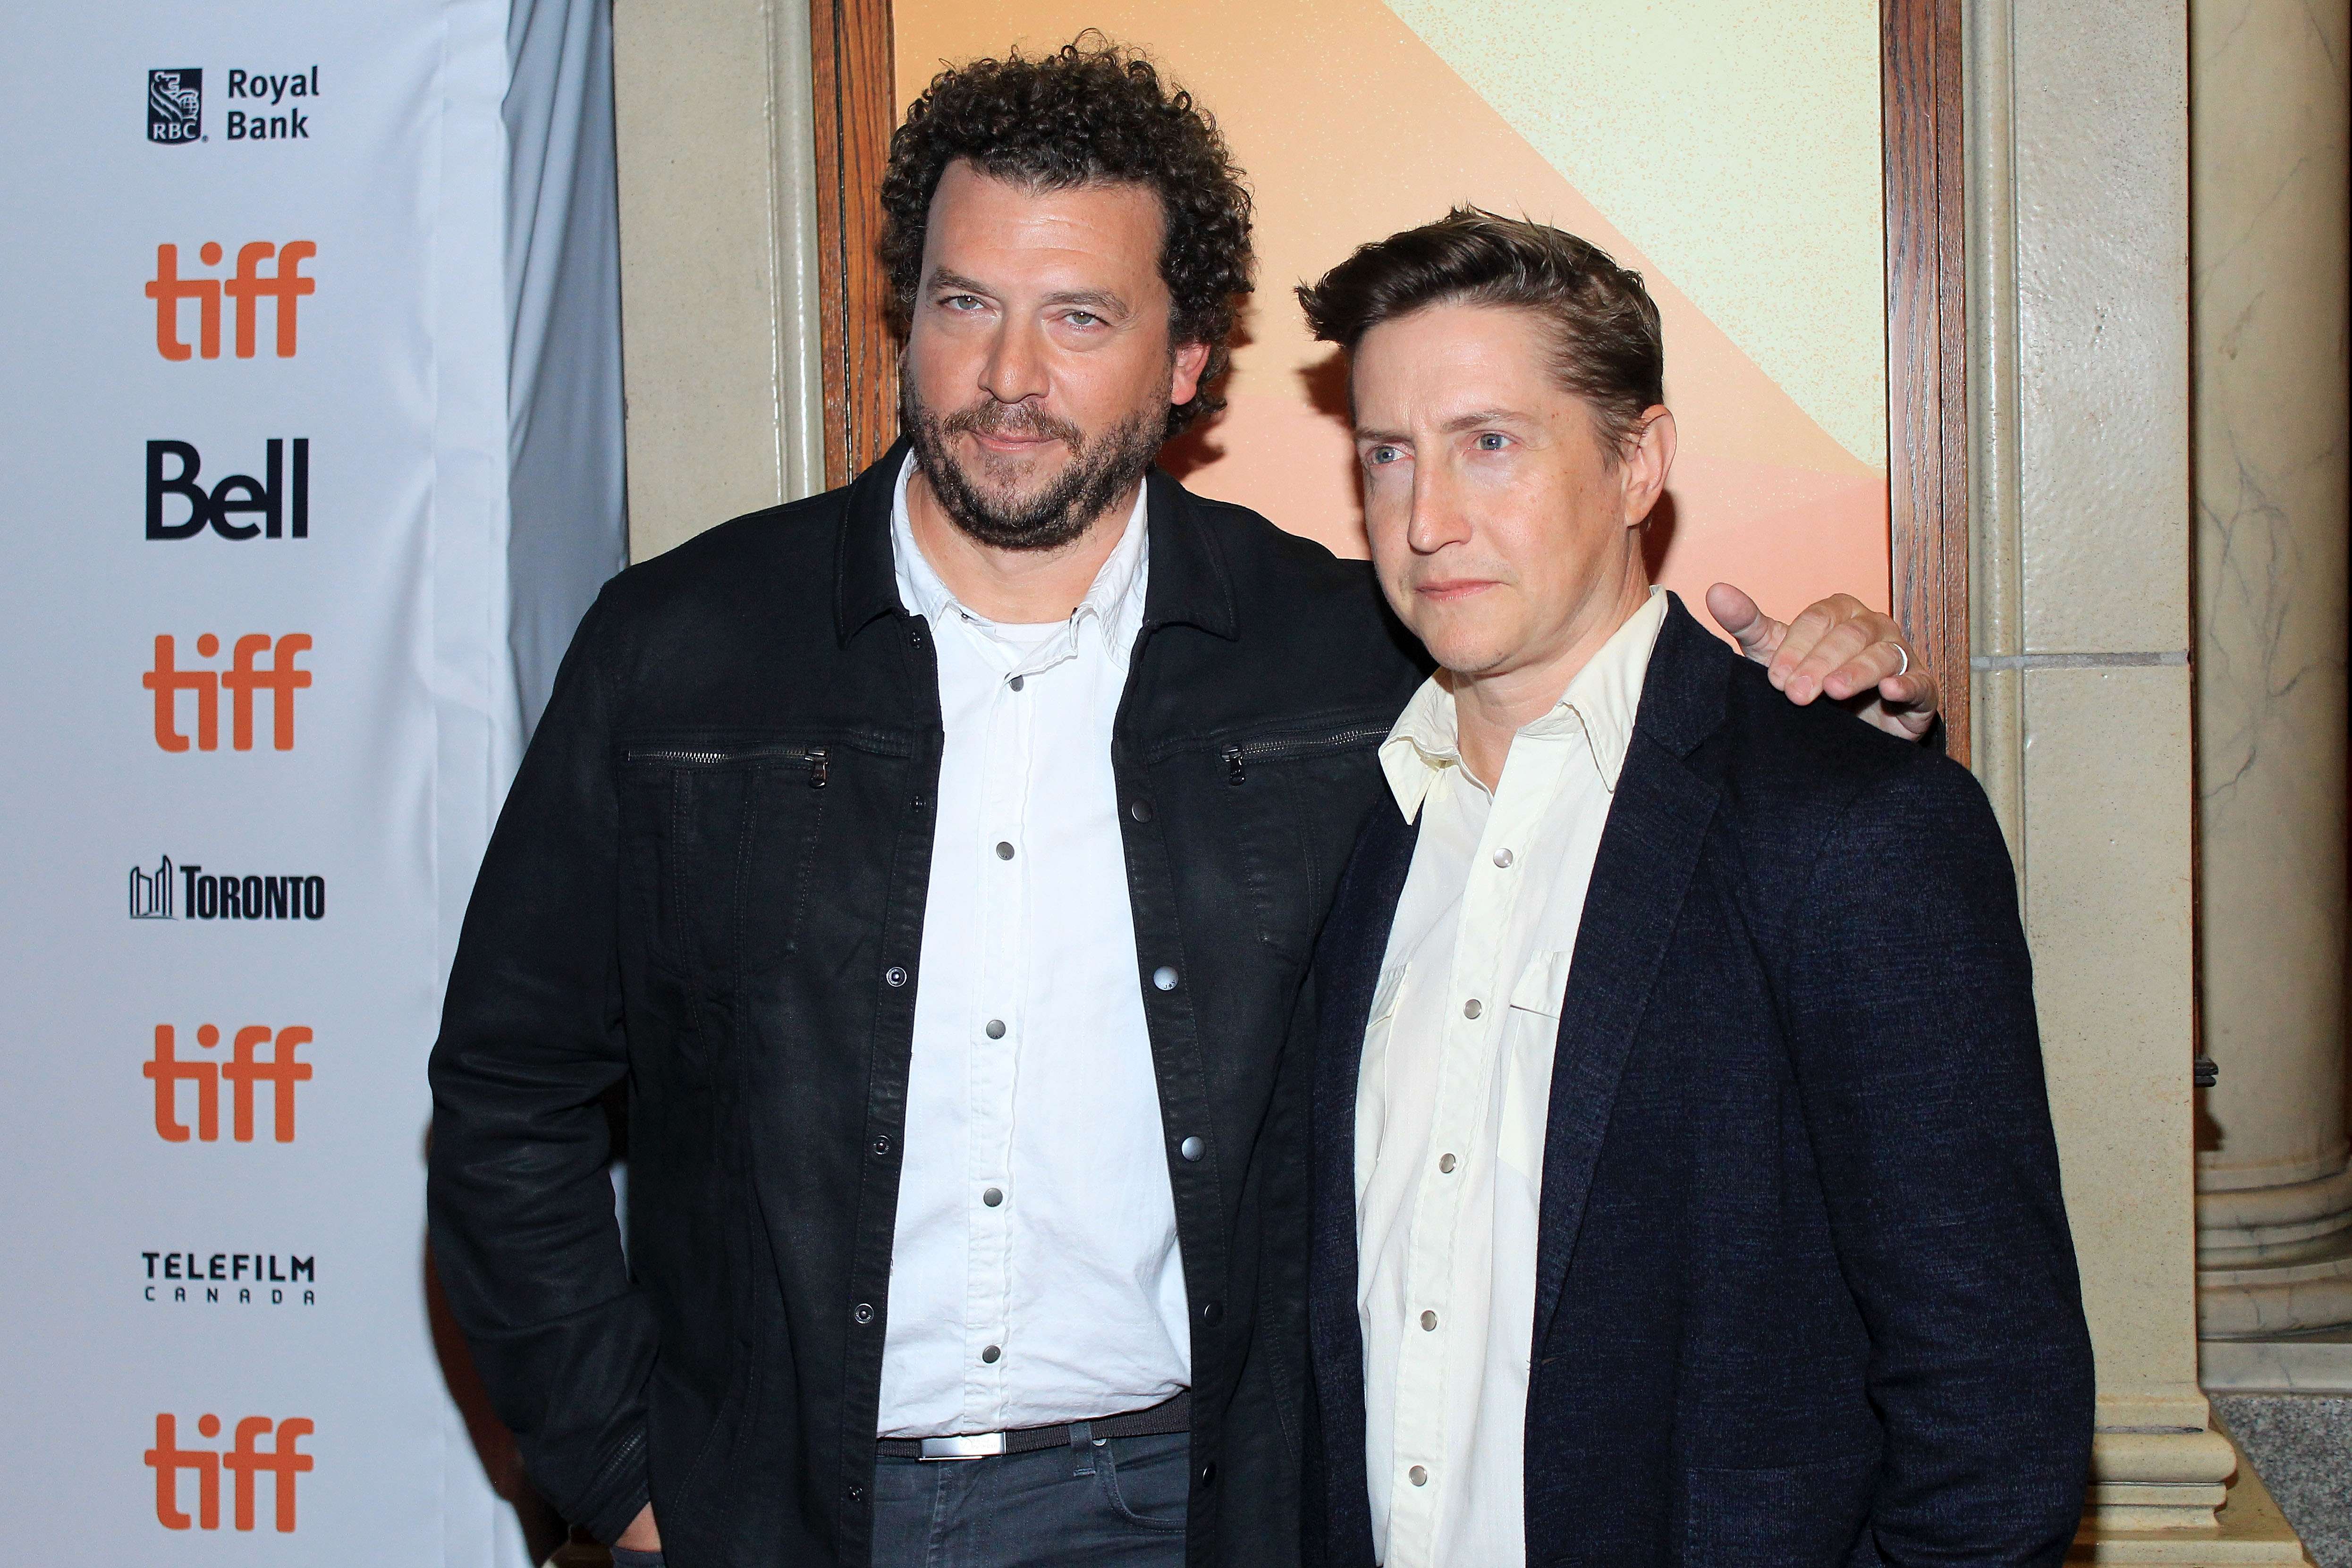  Danny McBride (L) and David Gordon Green attend the 'Halloween' premiere during 2018 Toronto International Film Festival at The Elgin on September 8, 2018 in Toronto, Canada. | Source: Getty Images